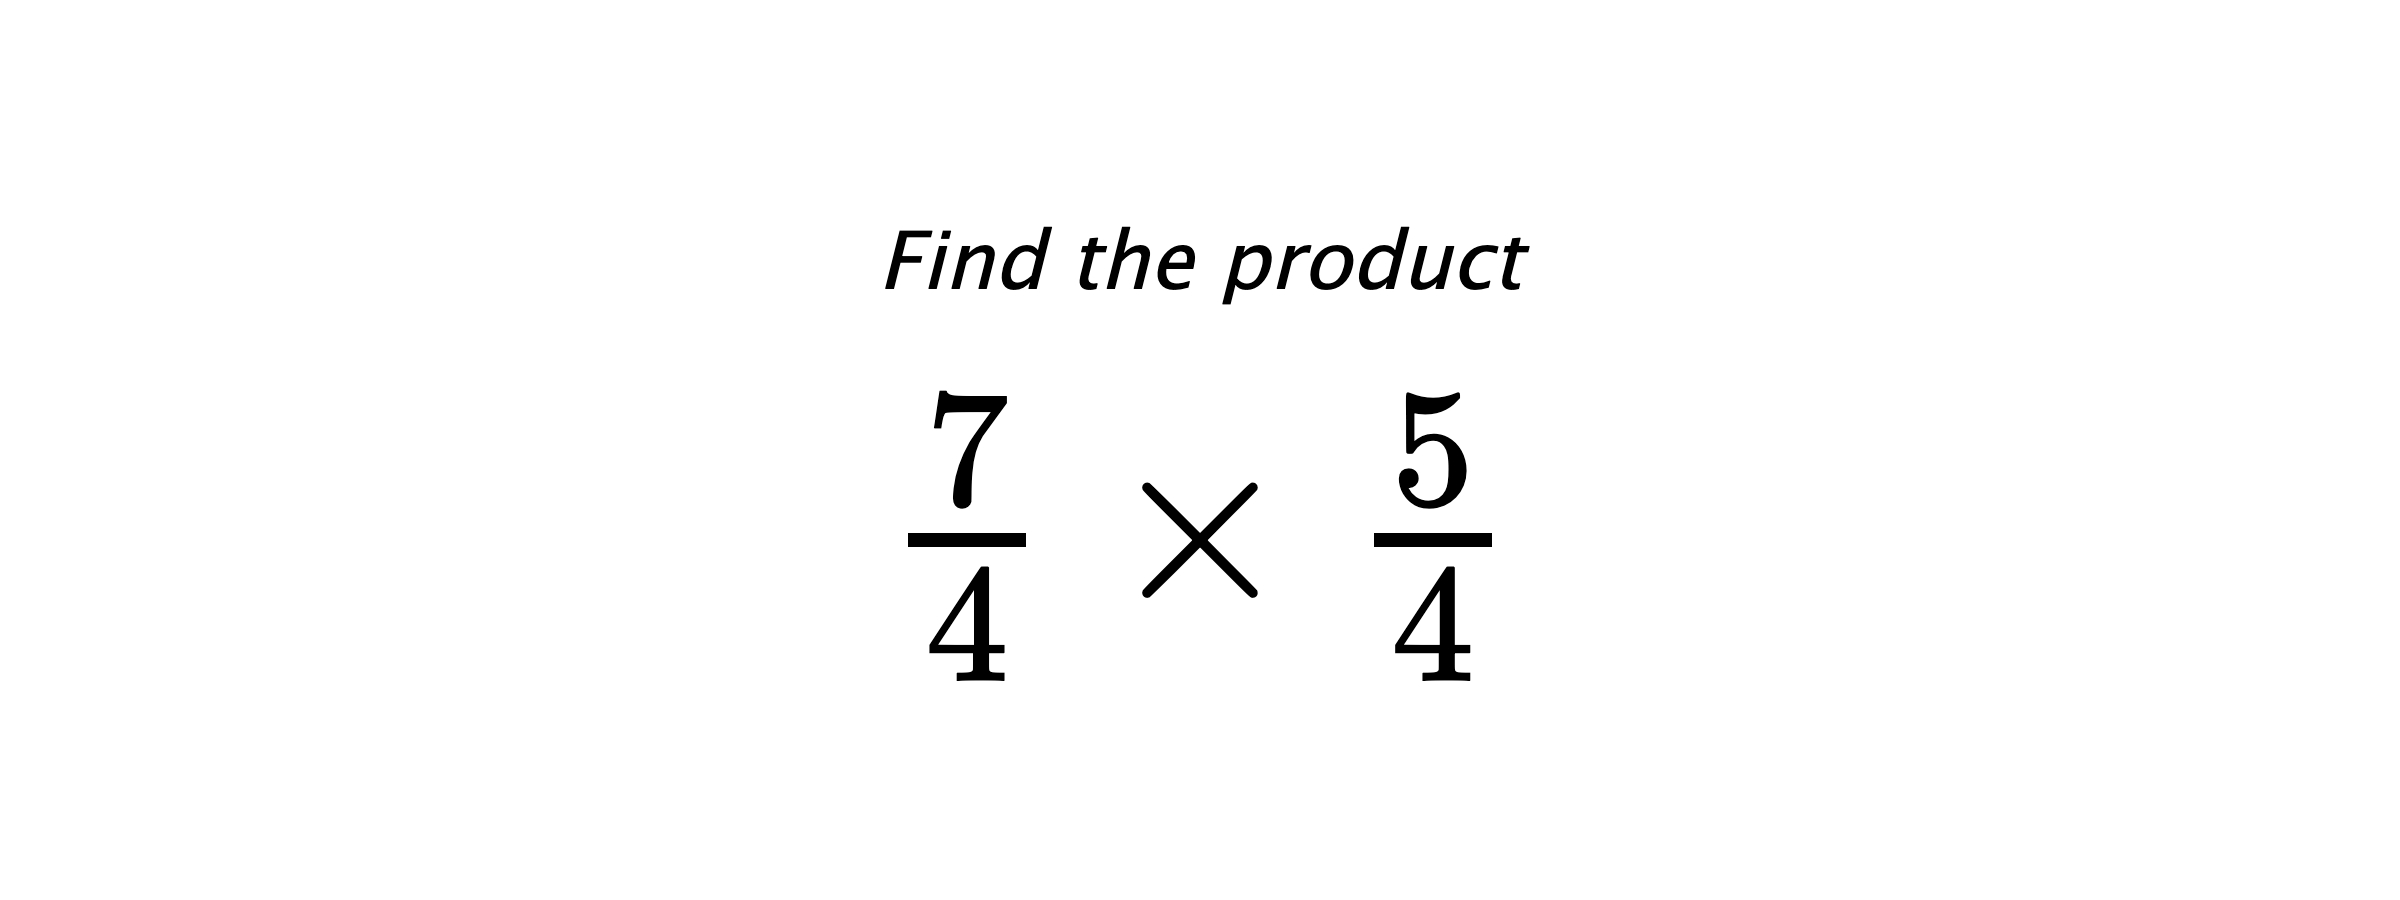 Find the product $ \frac{7}{4} \times \frac{5}{4} $